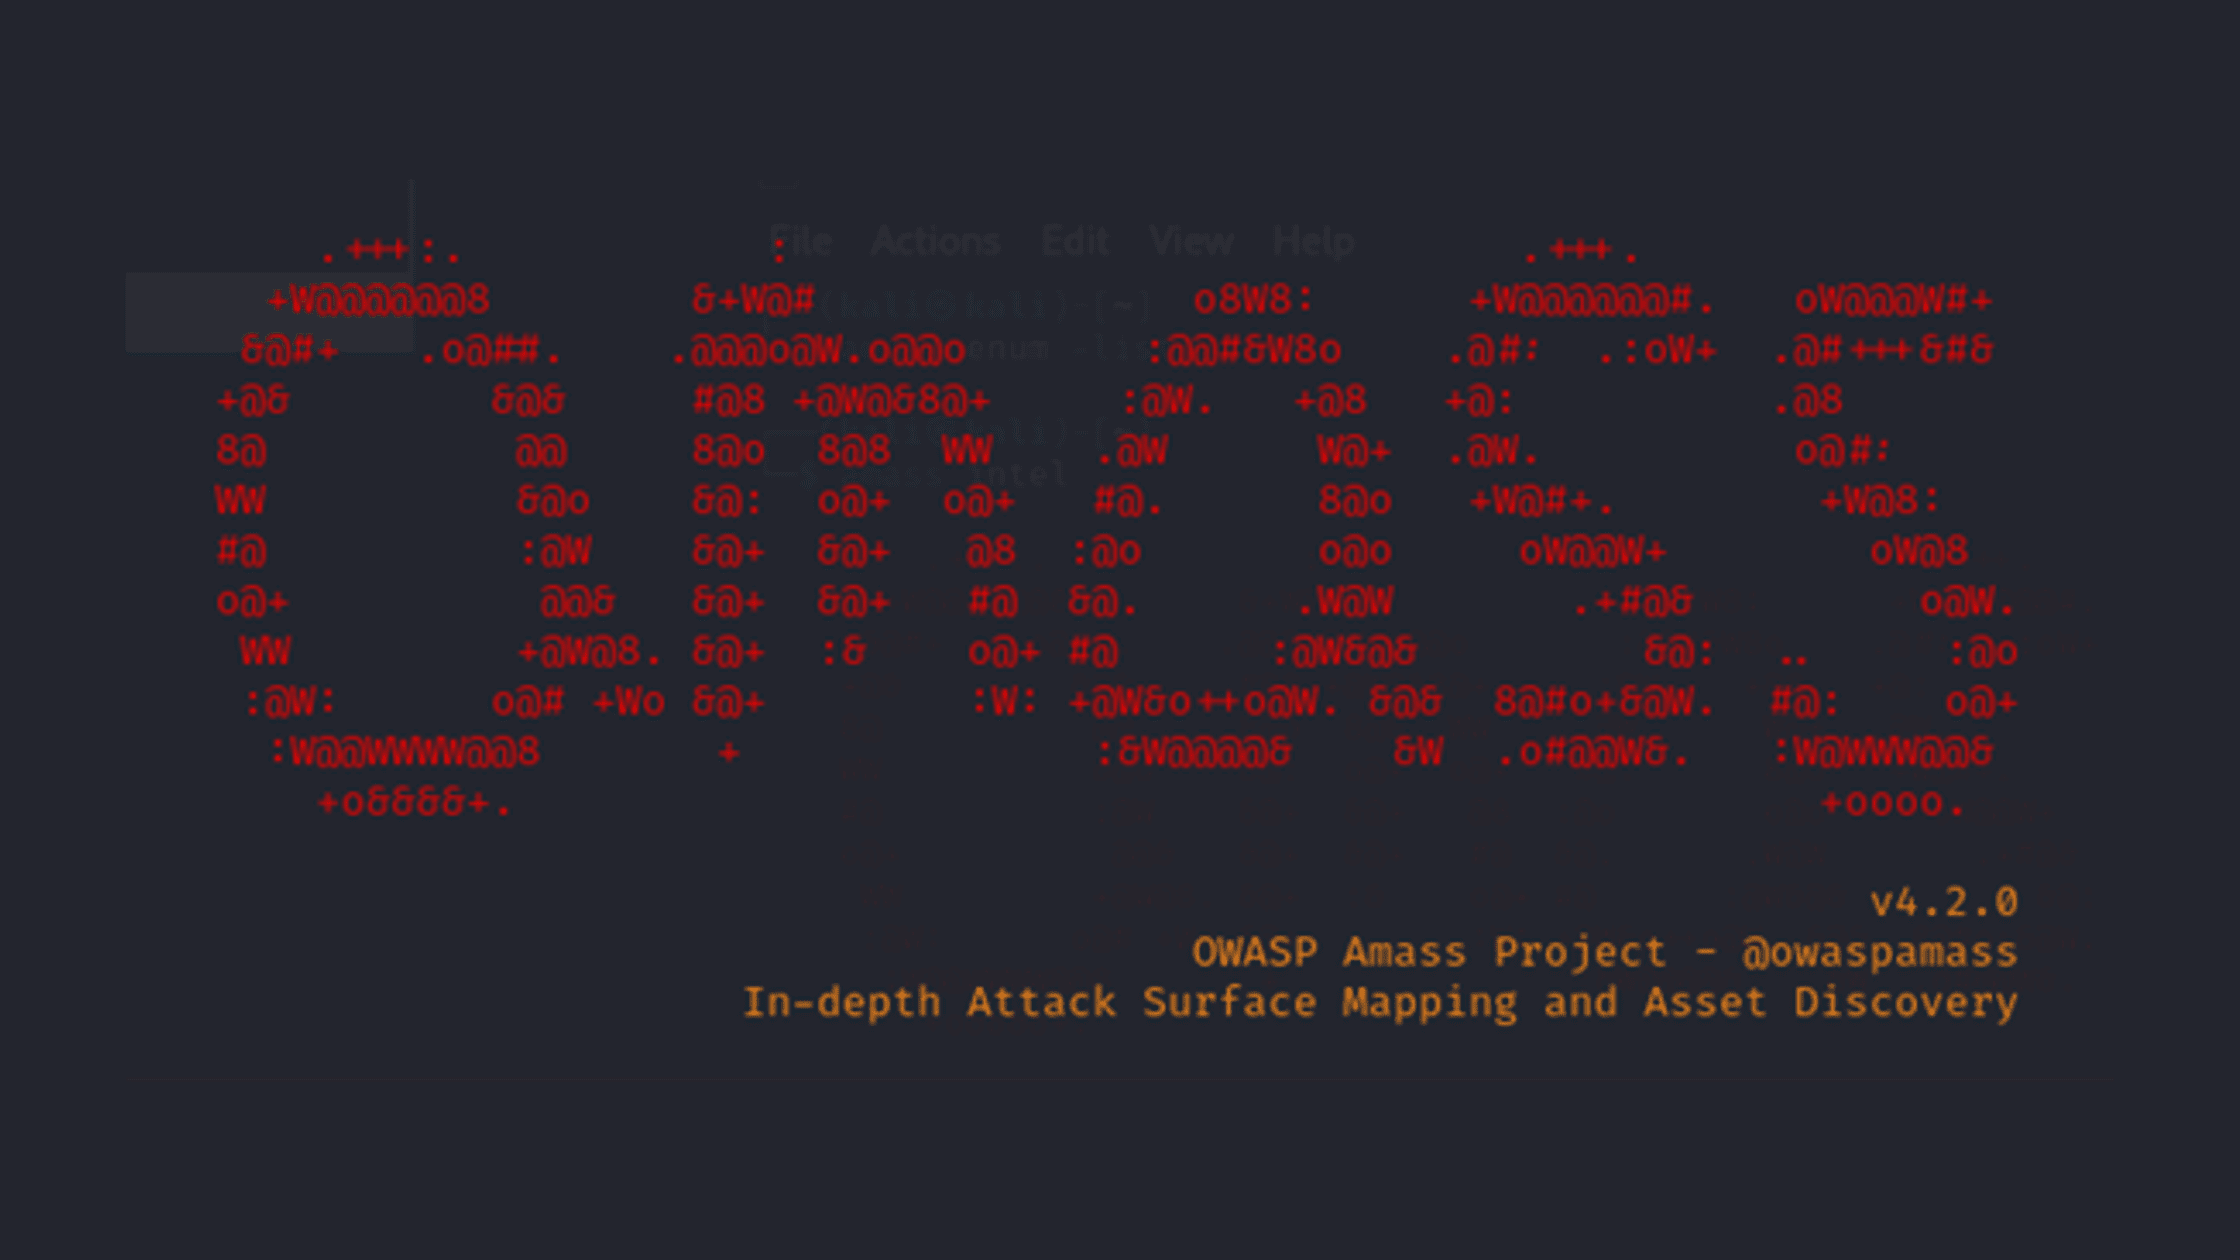 Amass Open Source Reconnaissance Tool For Network Mapping And Information Gathering